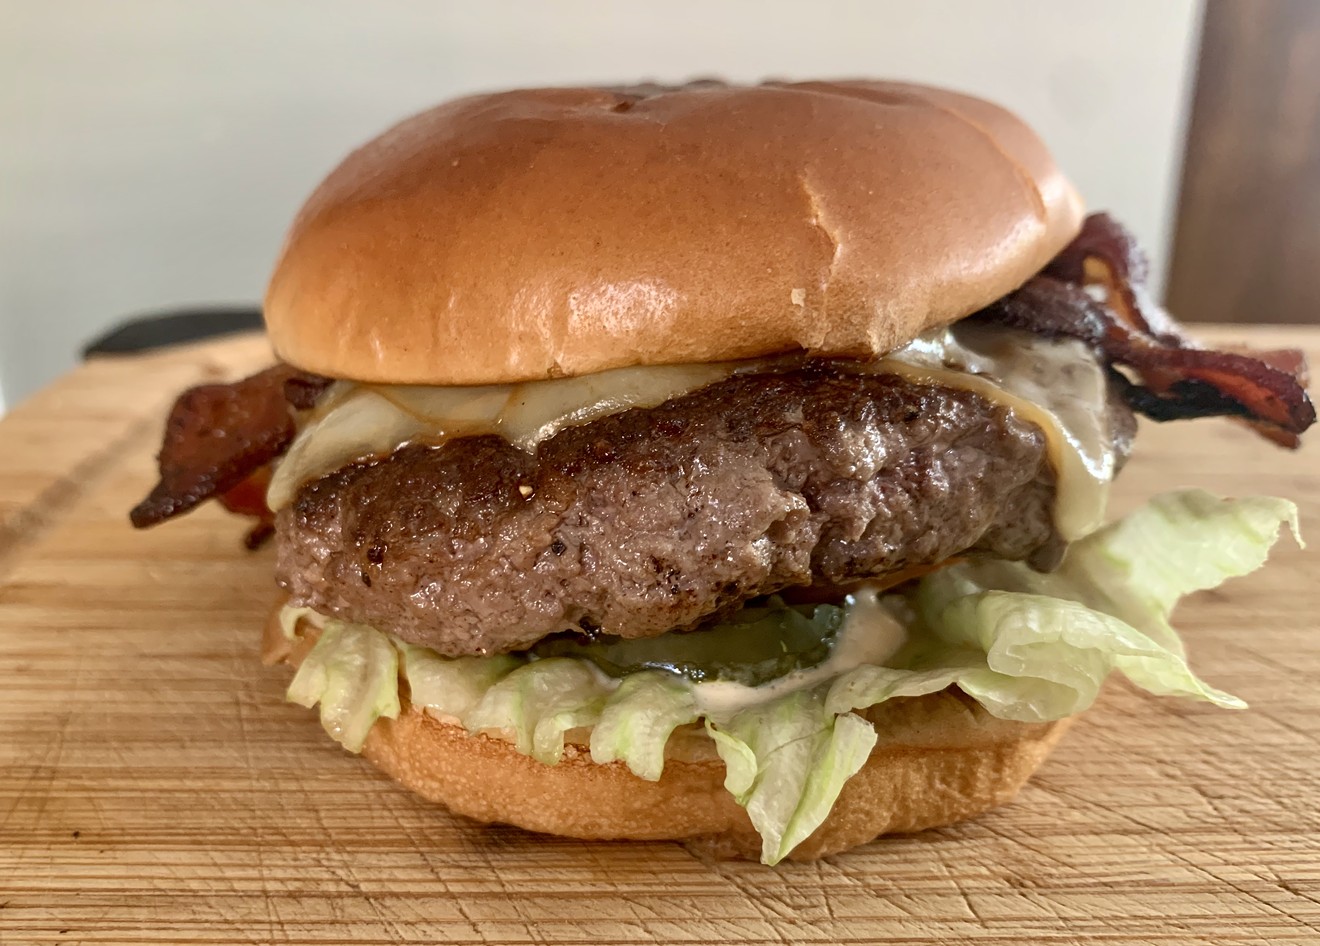 The Tate Farms cheeseburger for $16